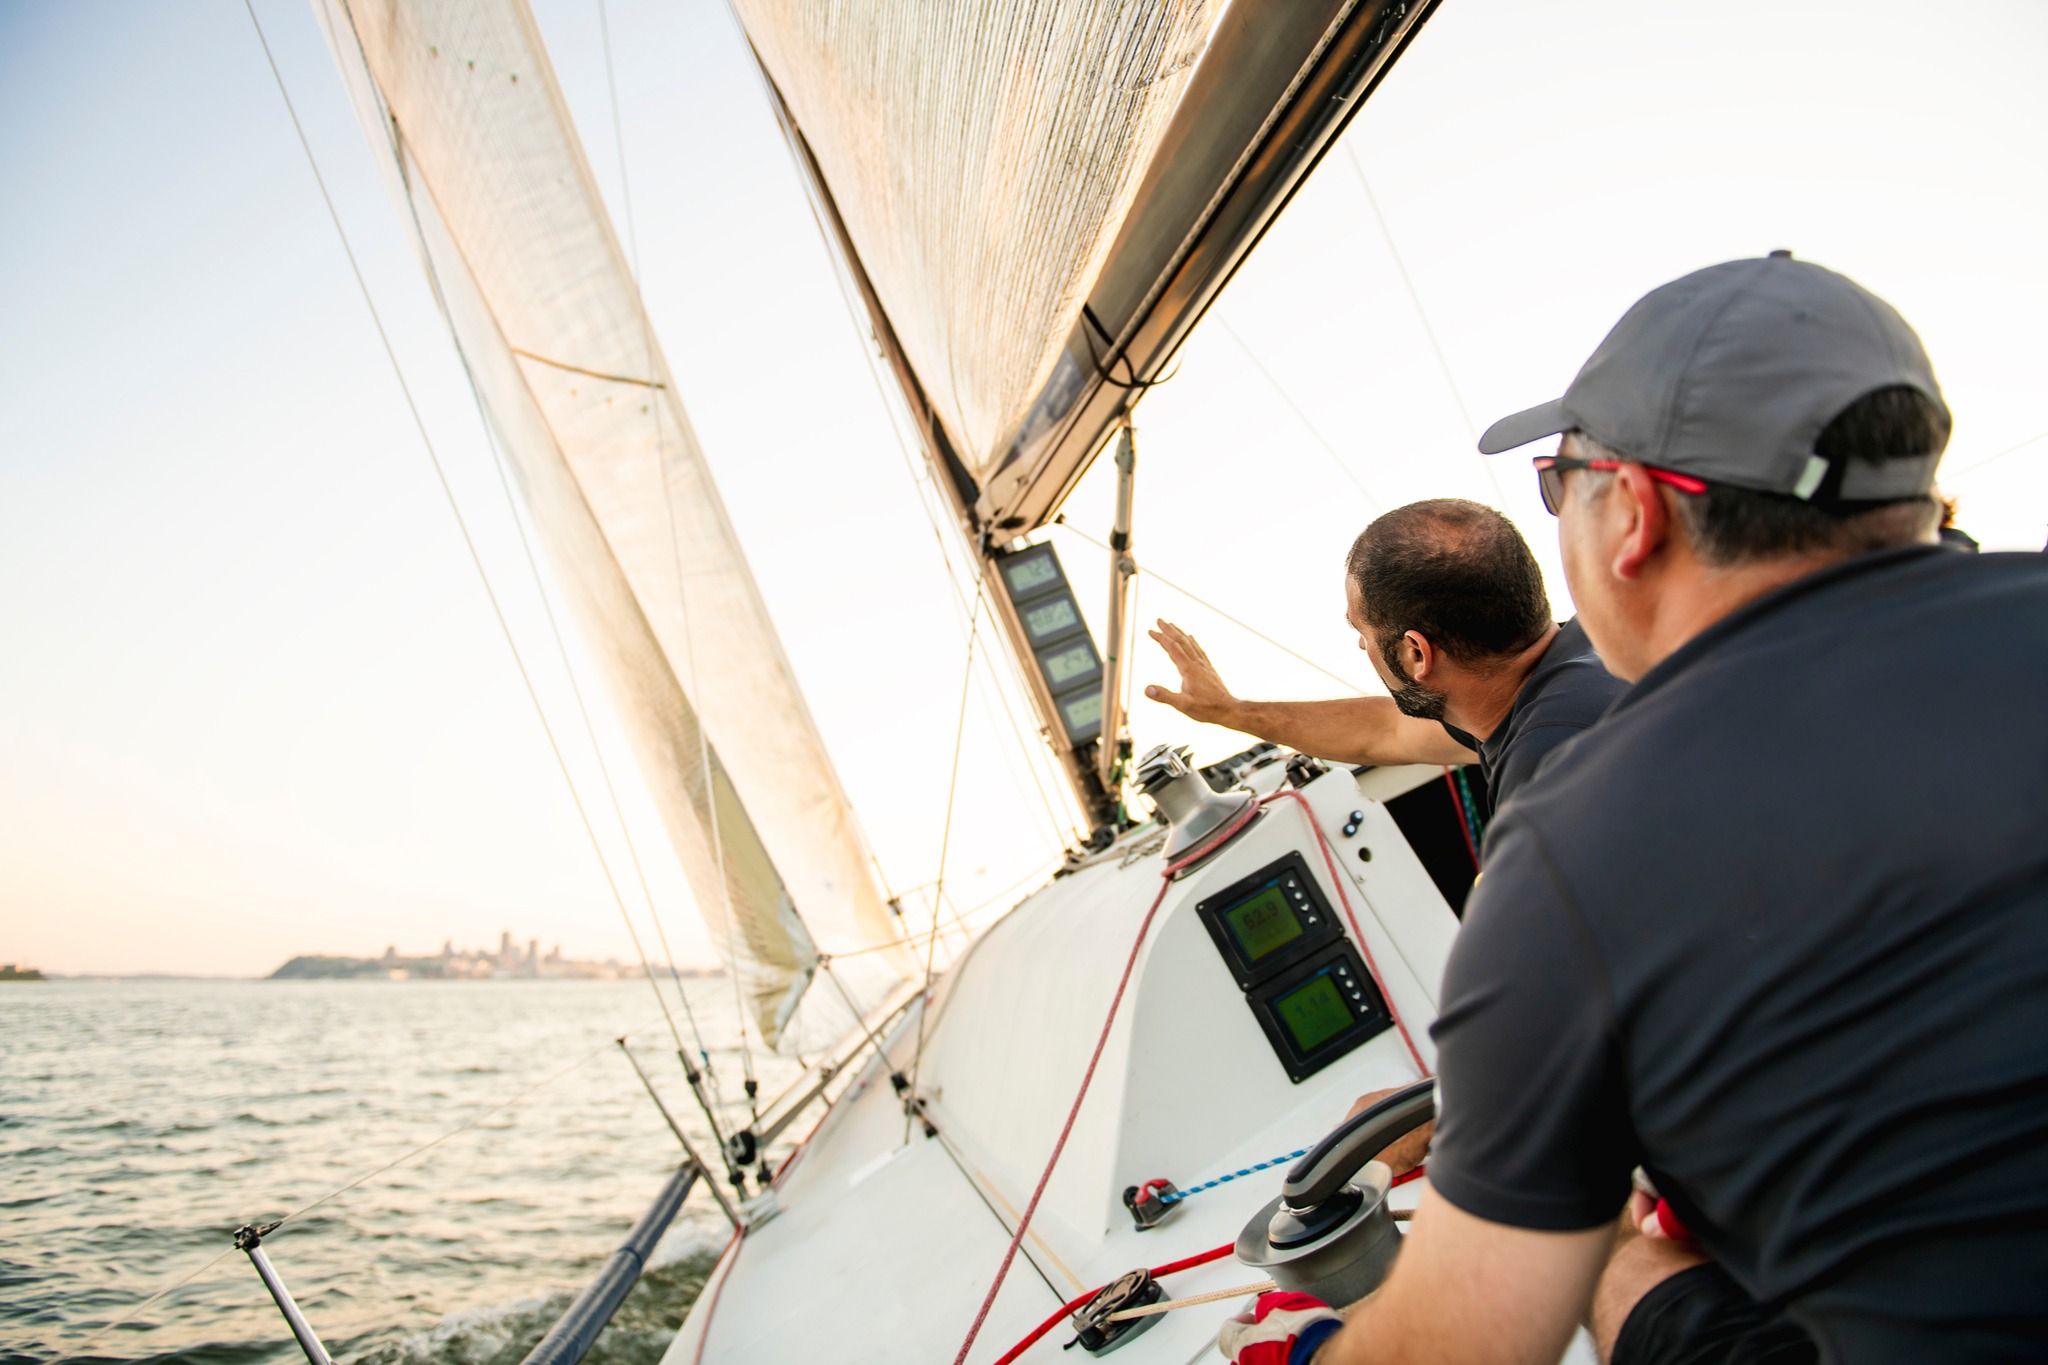 southern cross yachting sailing lessons